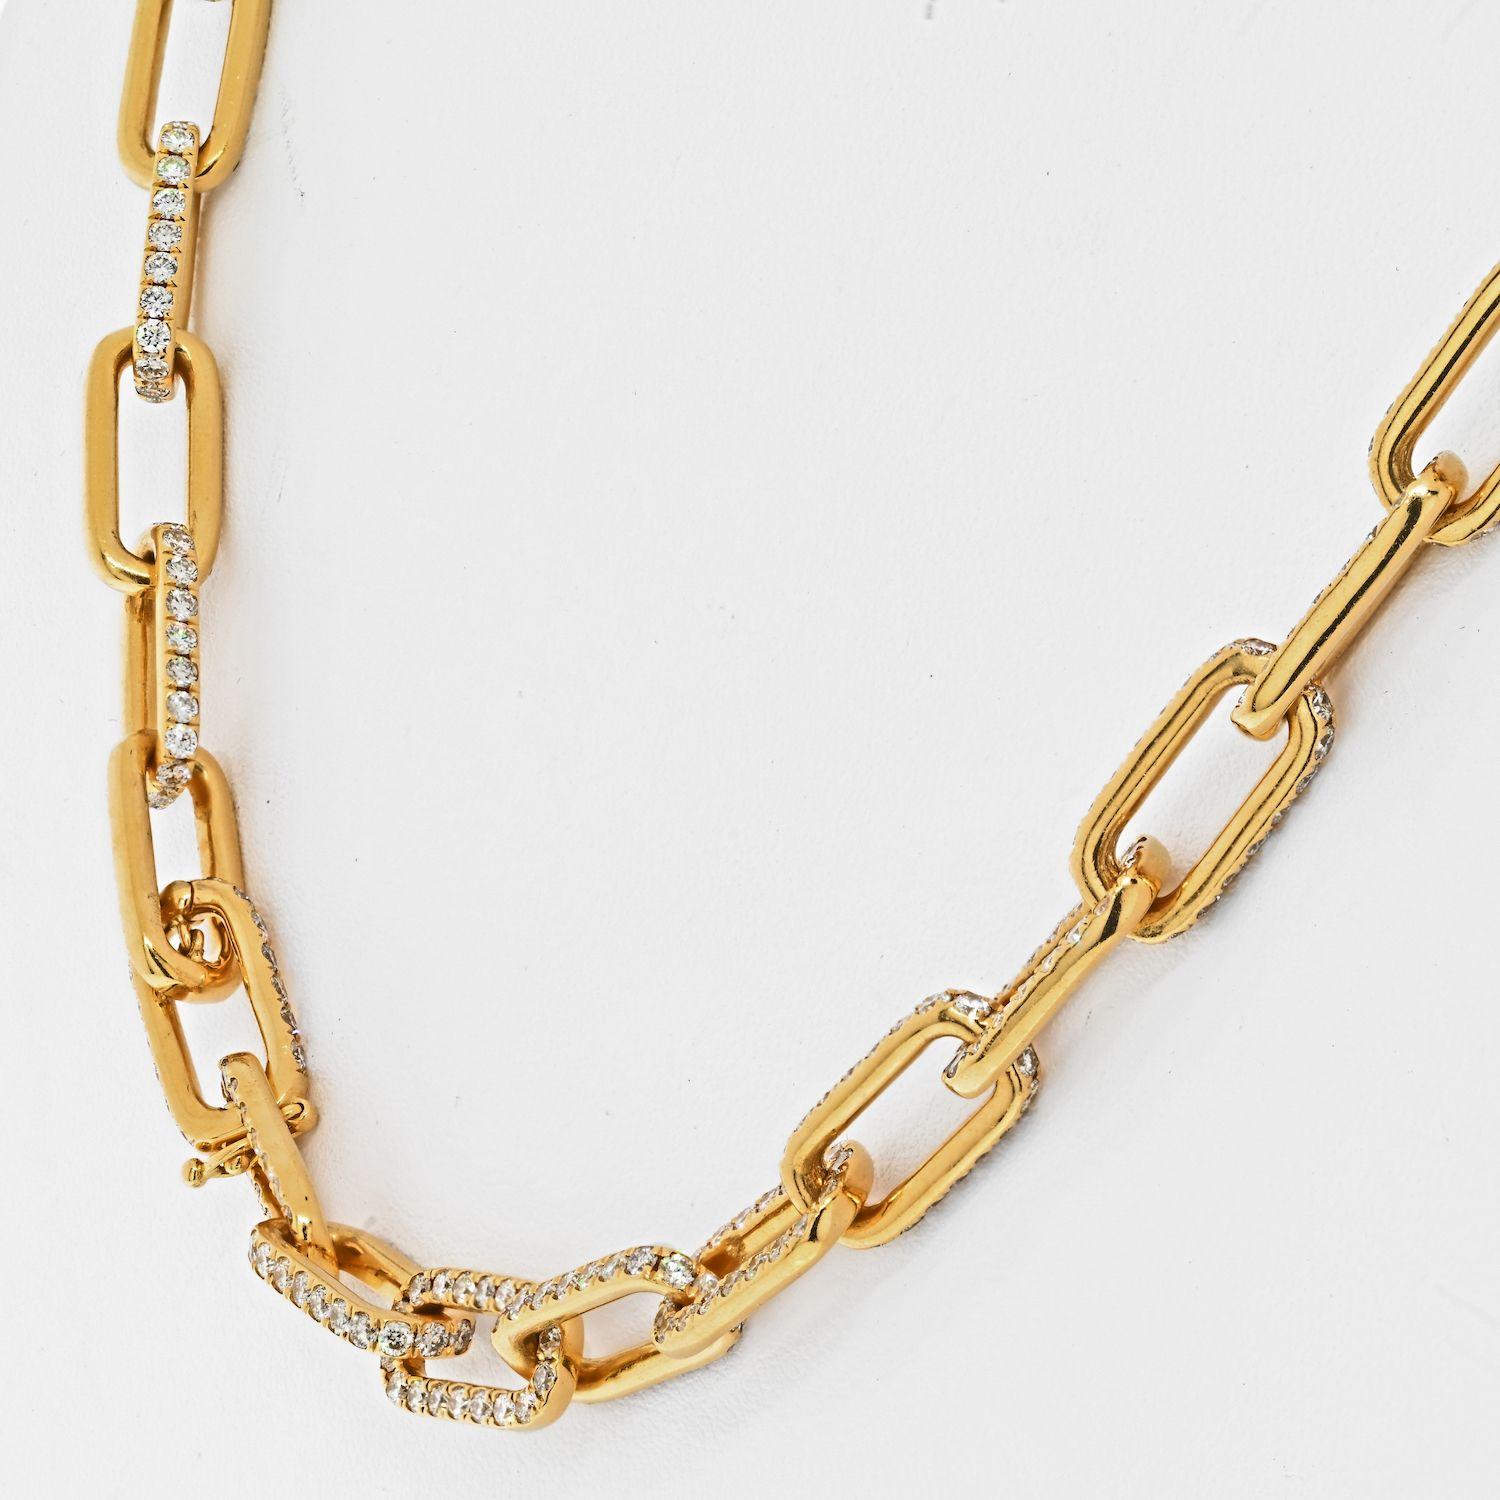 Modern 18K Yellow Gold 21 Carat Diamond Link Chain Necklace For Sale